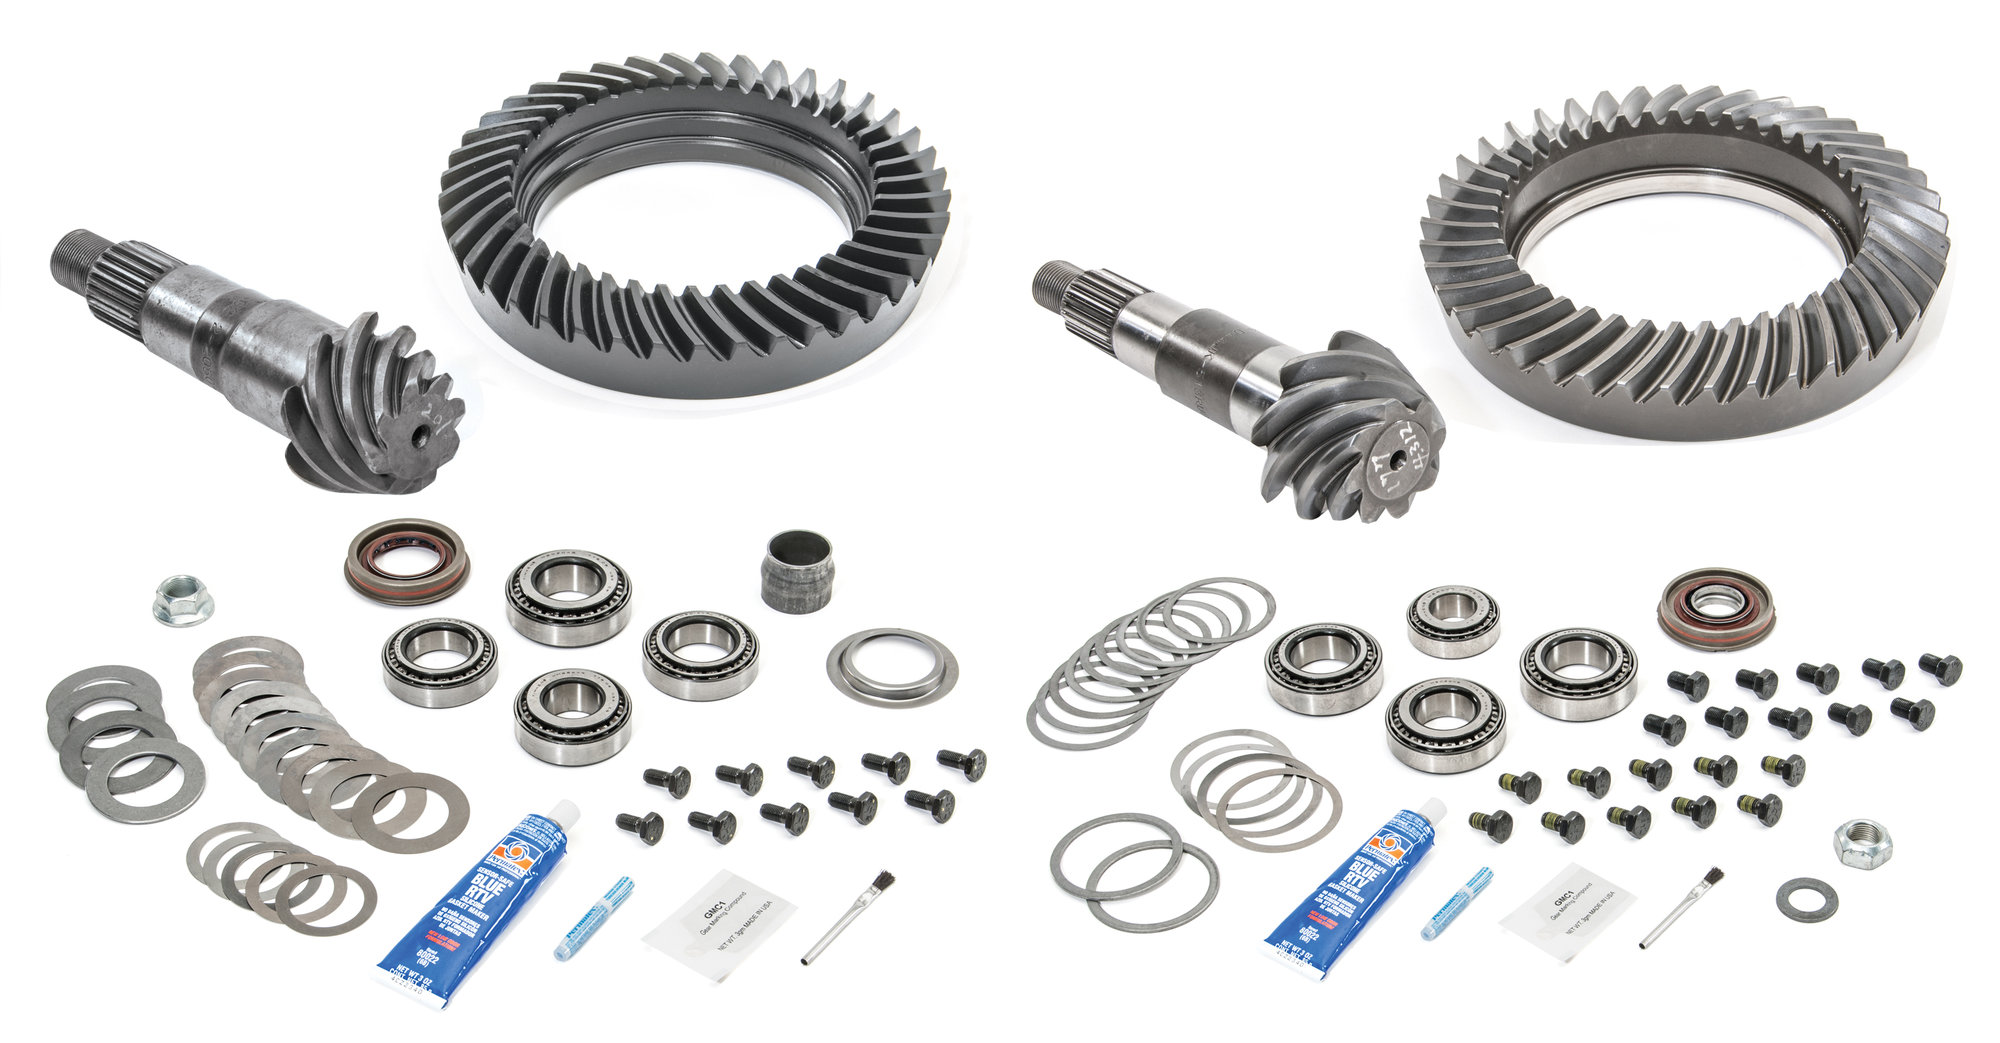 G2 Axle & Gear Front and Rear Ring and Pinion with Master Install Kits for  97-06 Jeep Wrangler TJ & Wrangler Unlimited LJ with Dana 30 Front & Dana 44  Rear | Quadratec